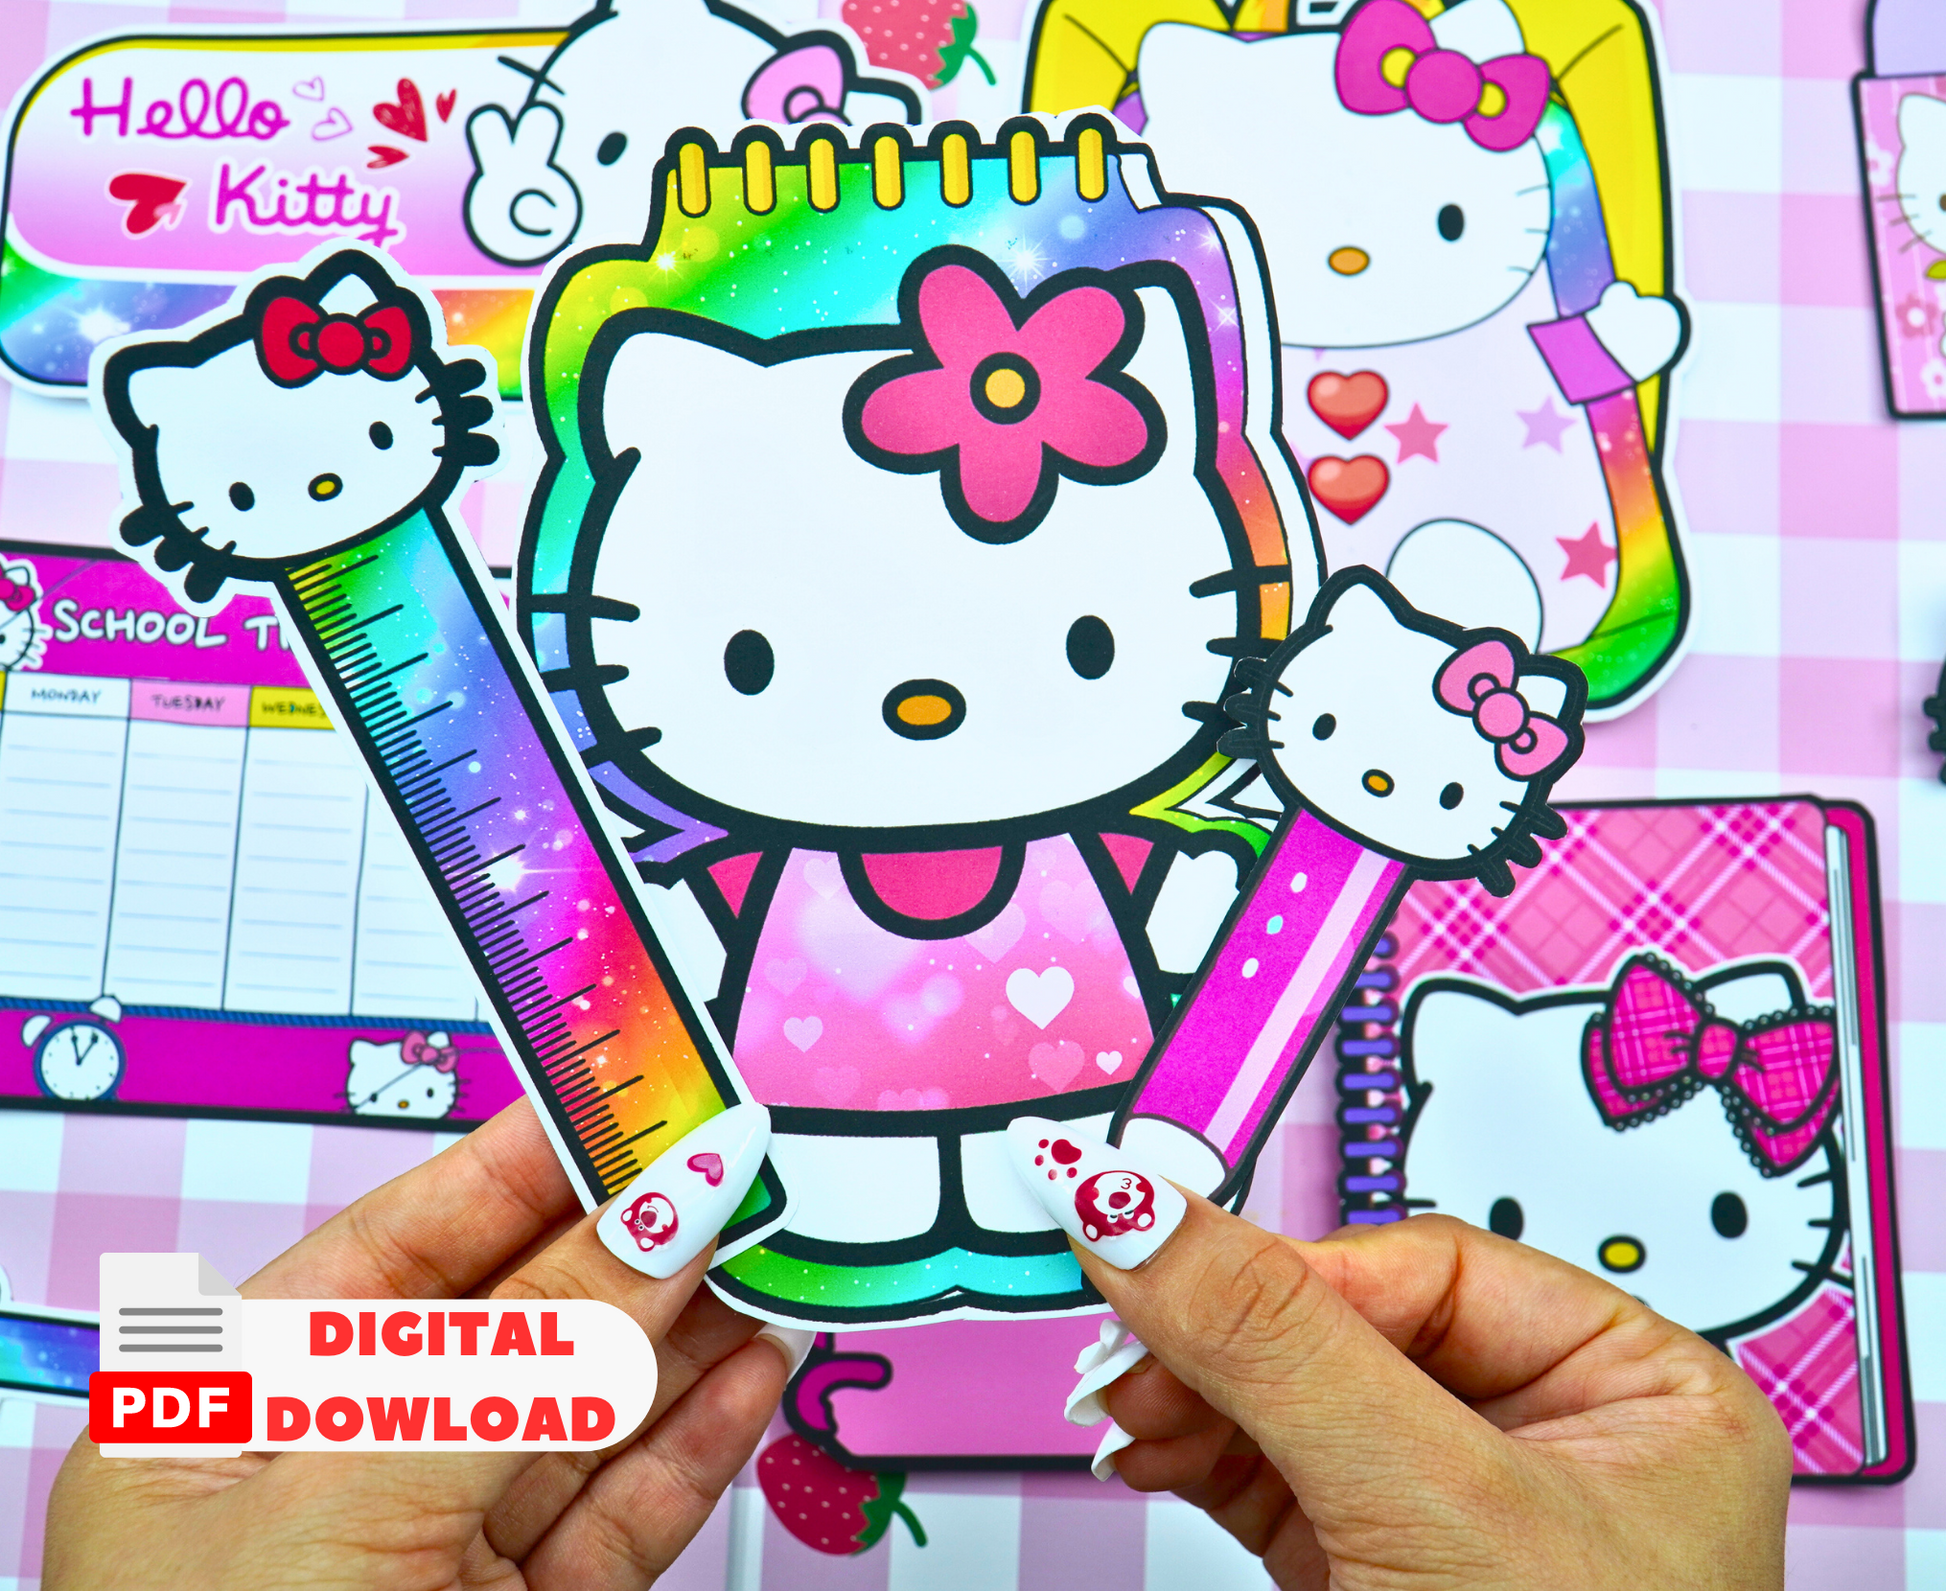 hello kitty office supplies products for sale